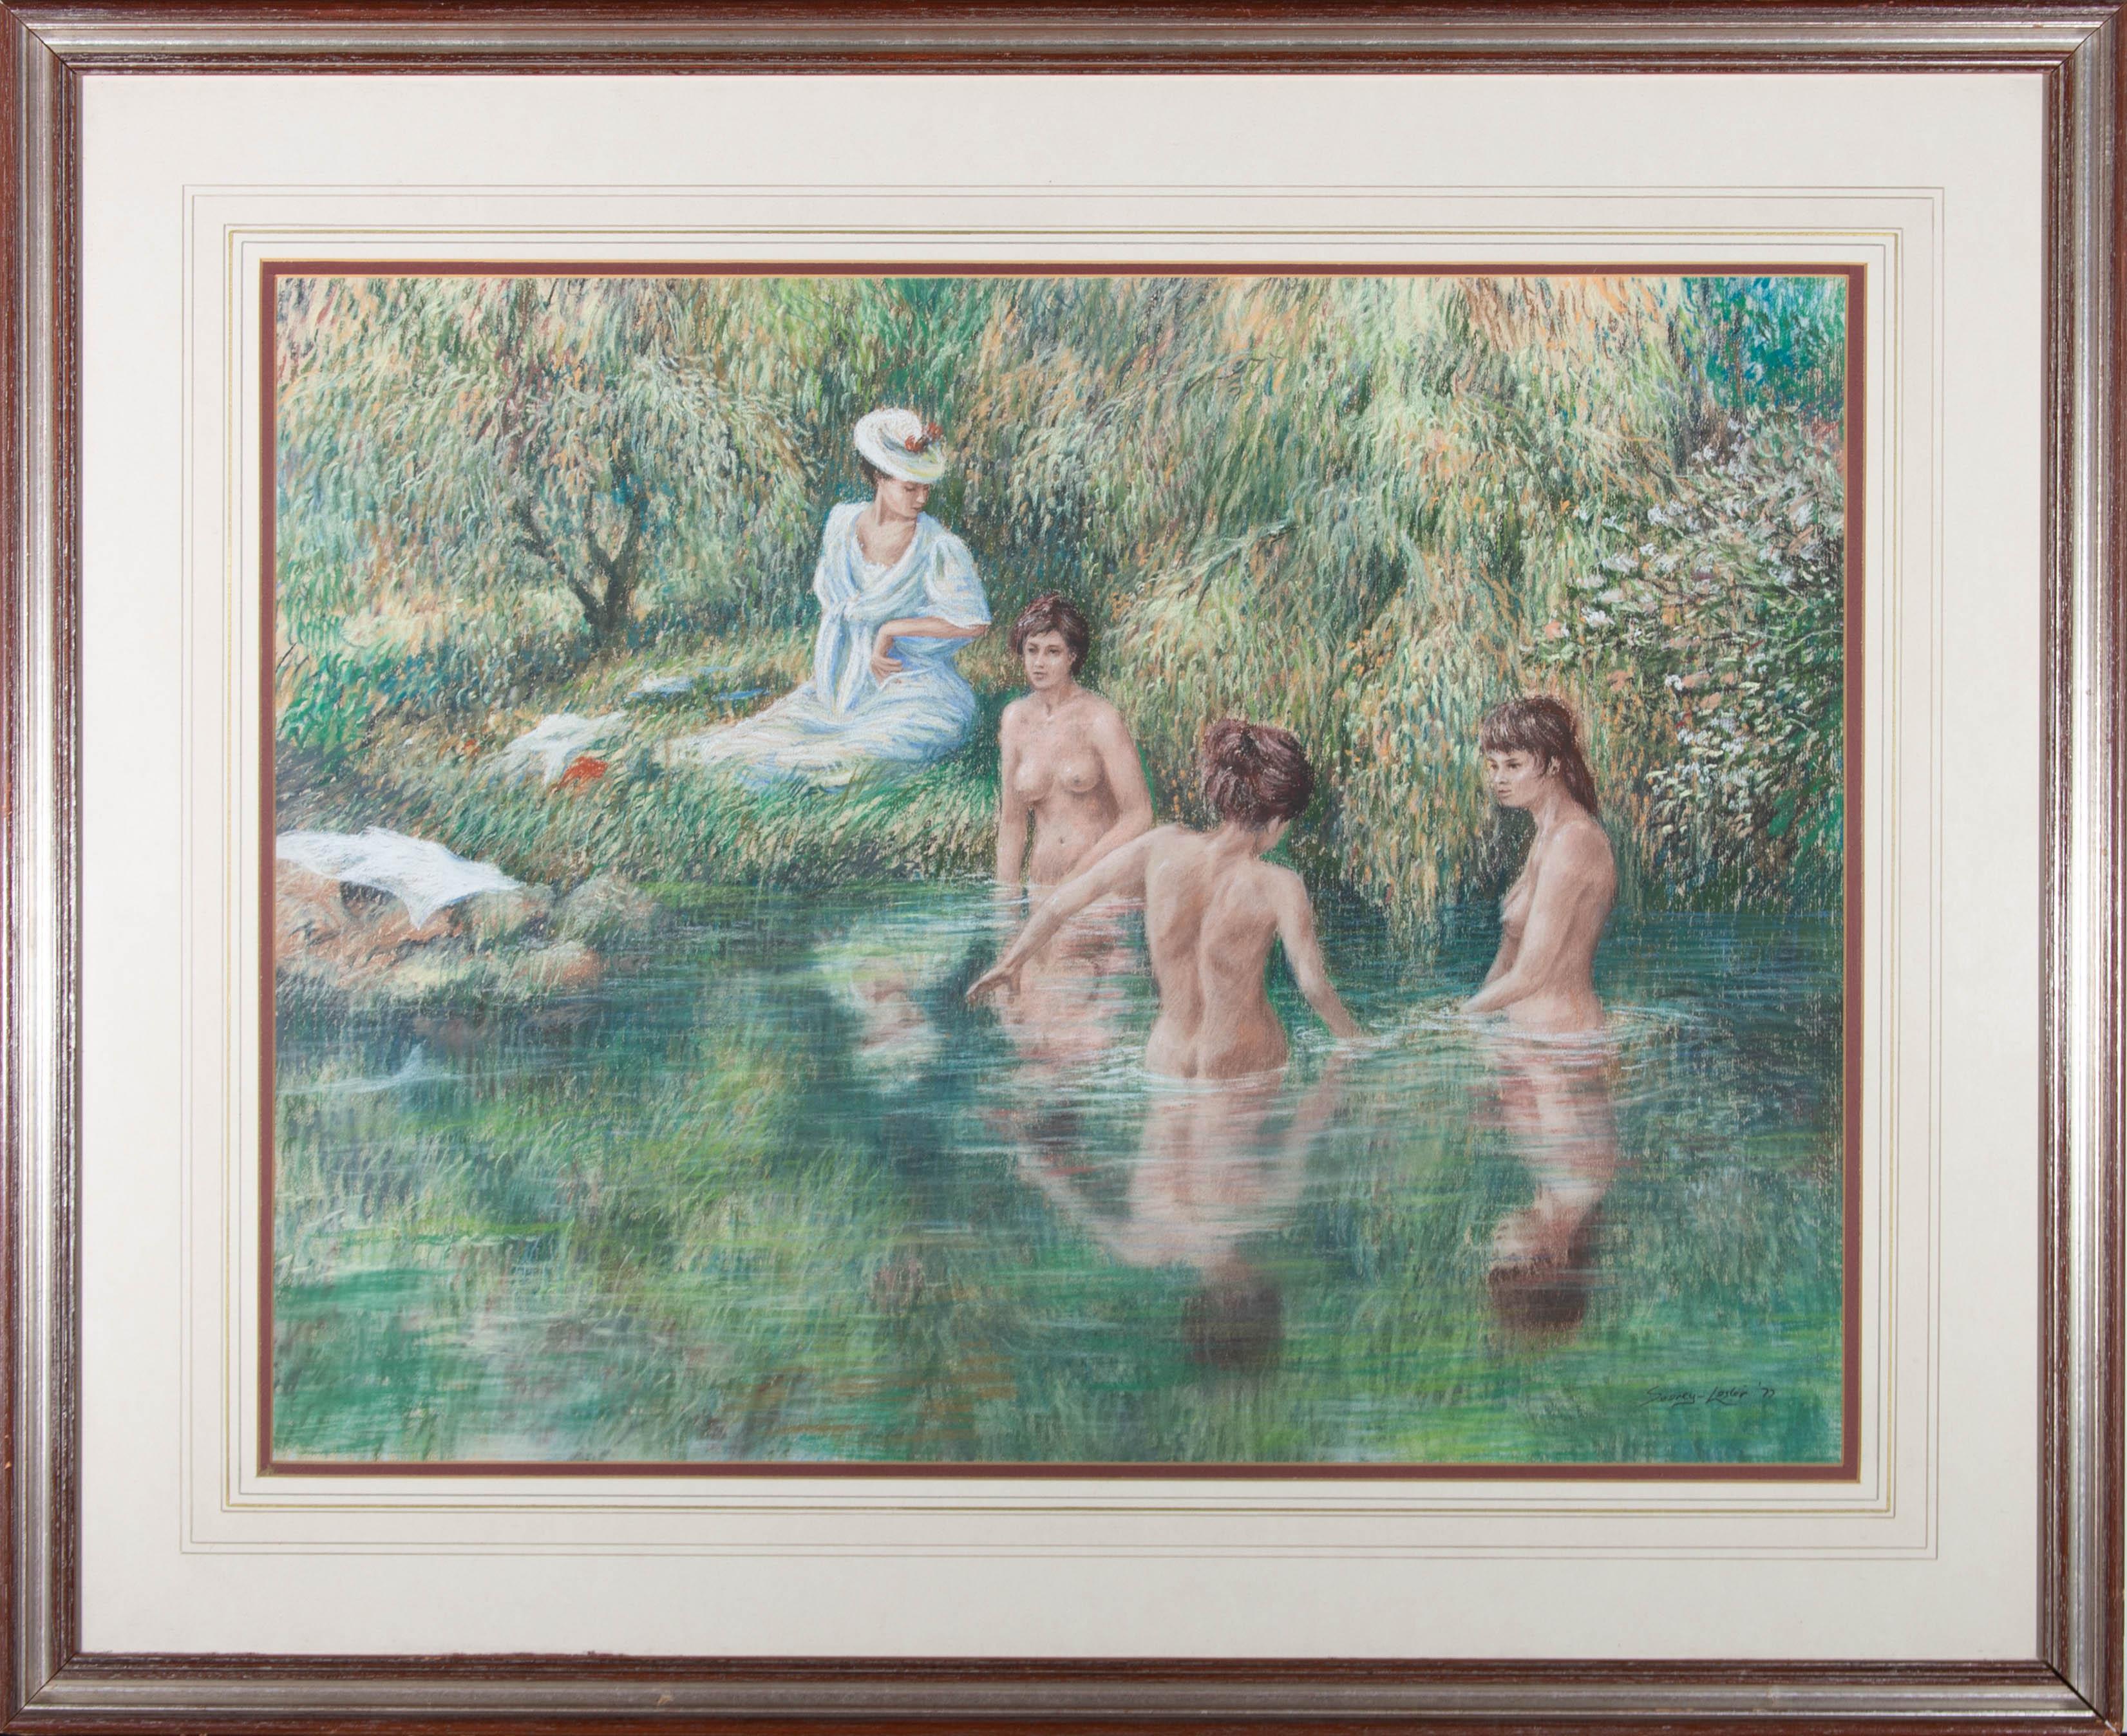 Unknown Nude - 1977 Pastel - The Bathers